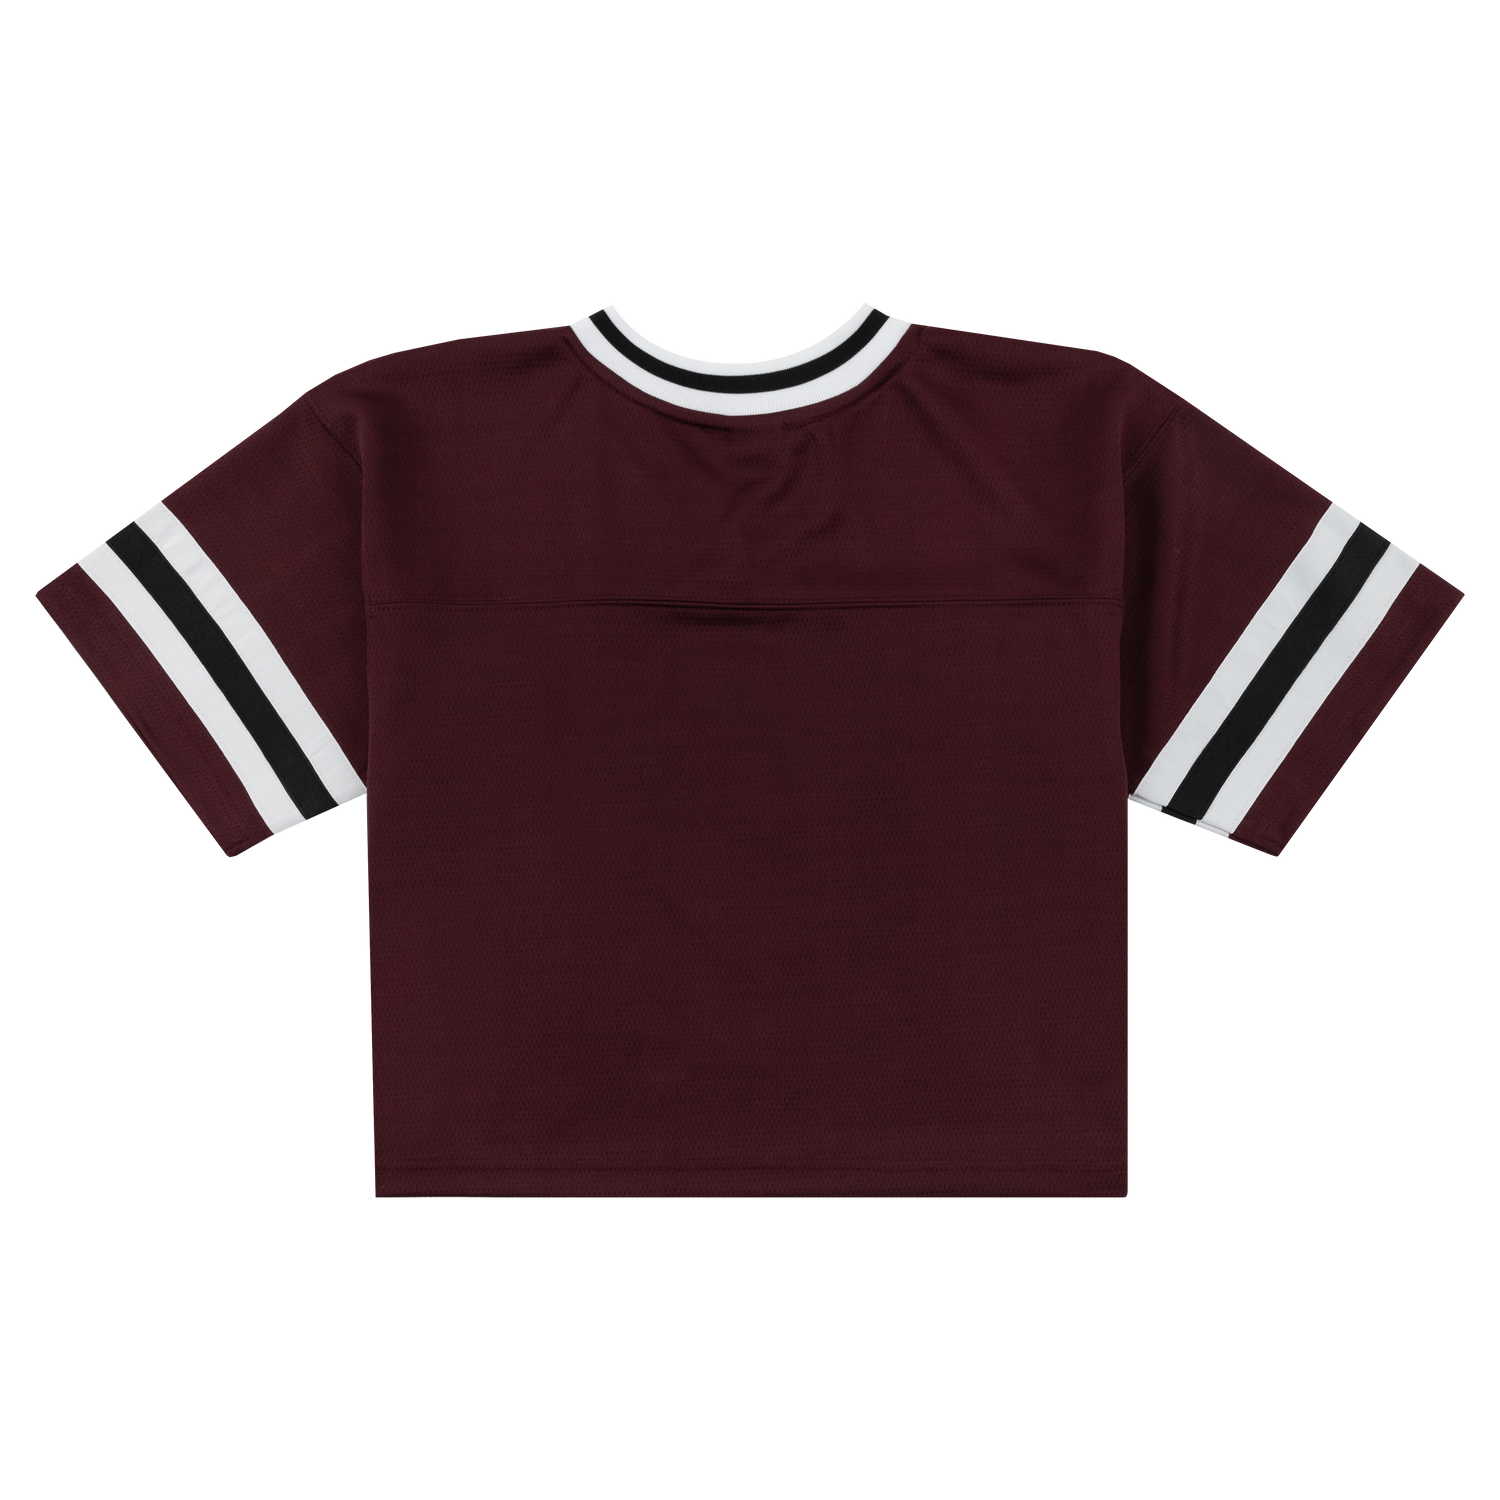 Texas A&M Cropped Football Jersey